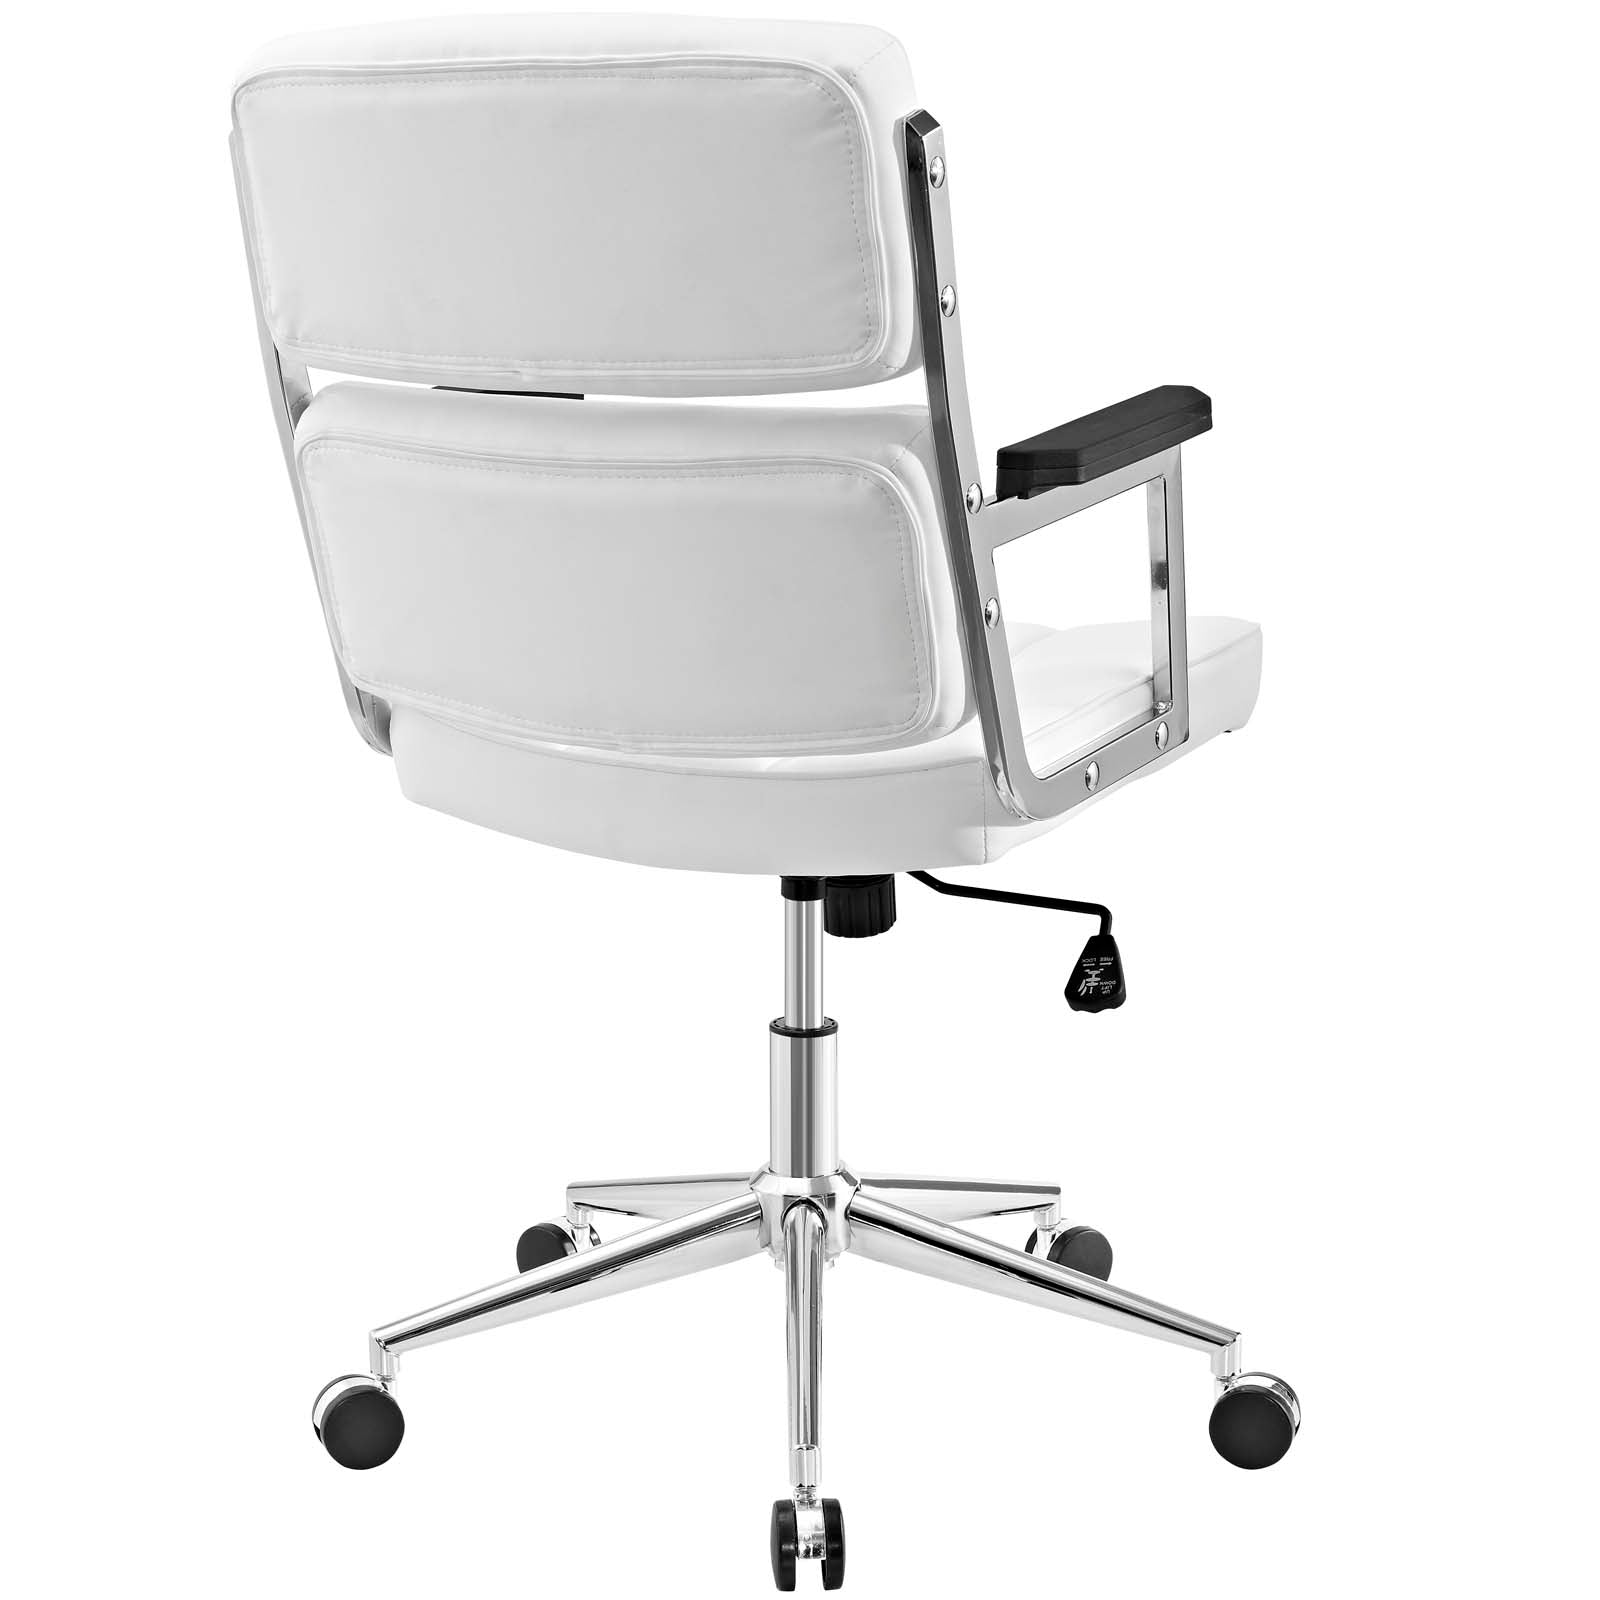 Modway Task Chairs - Portray Highback Upholstered Vinyl Office Chair White